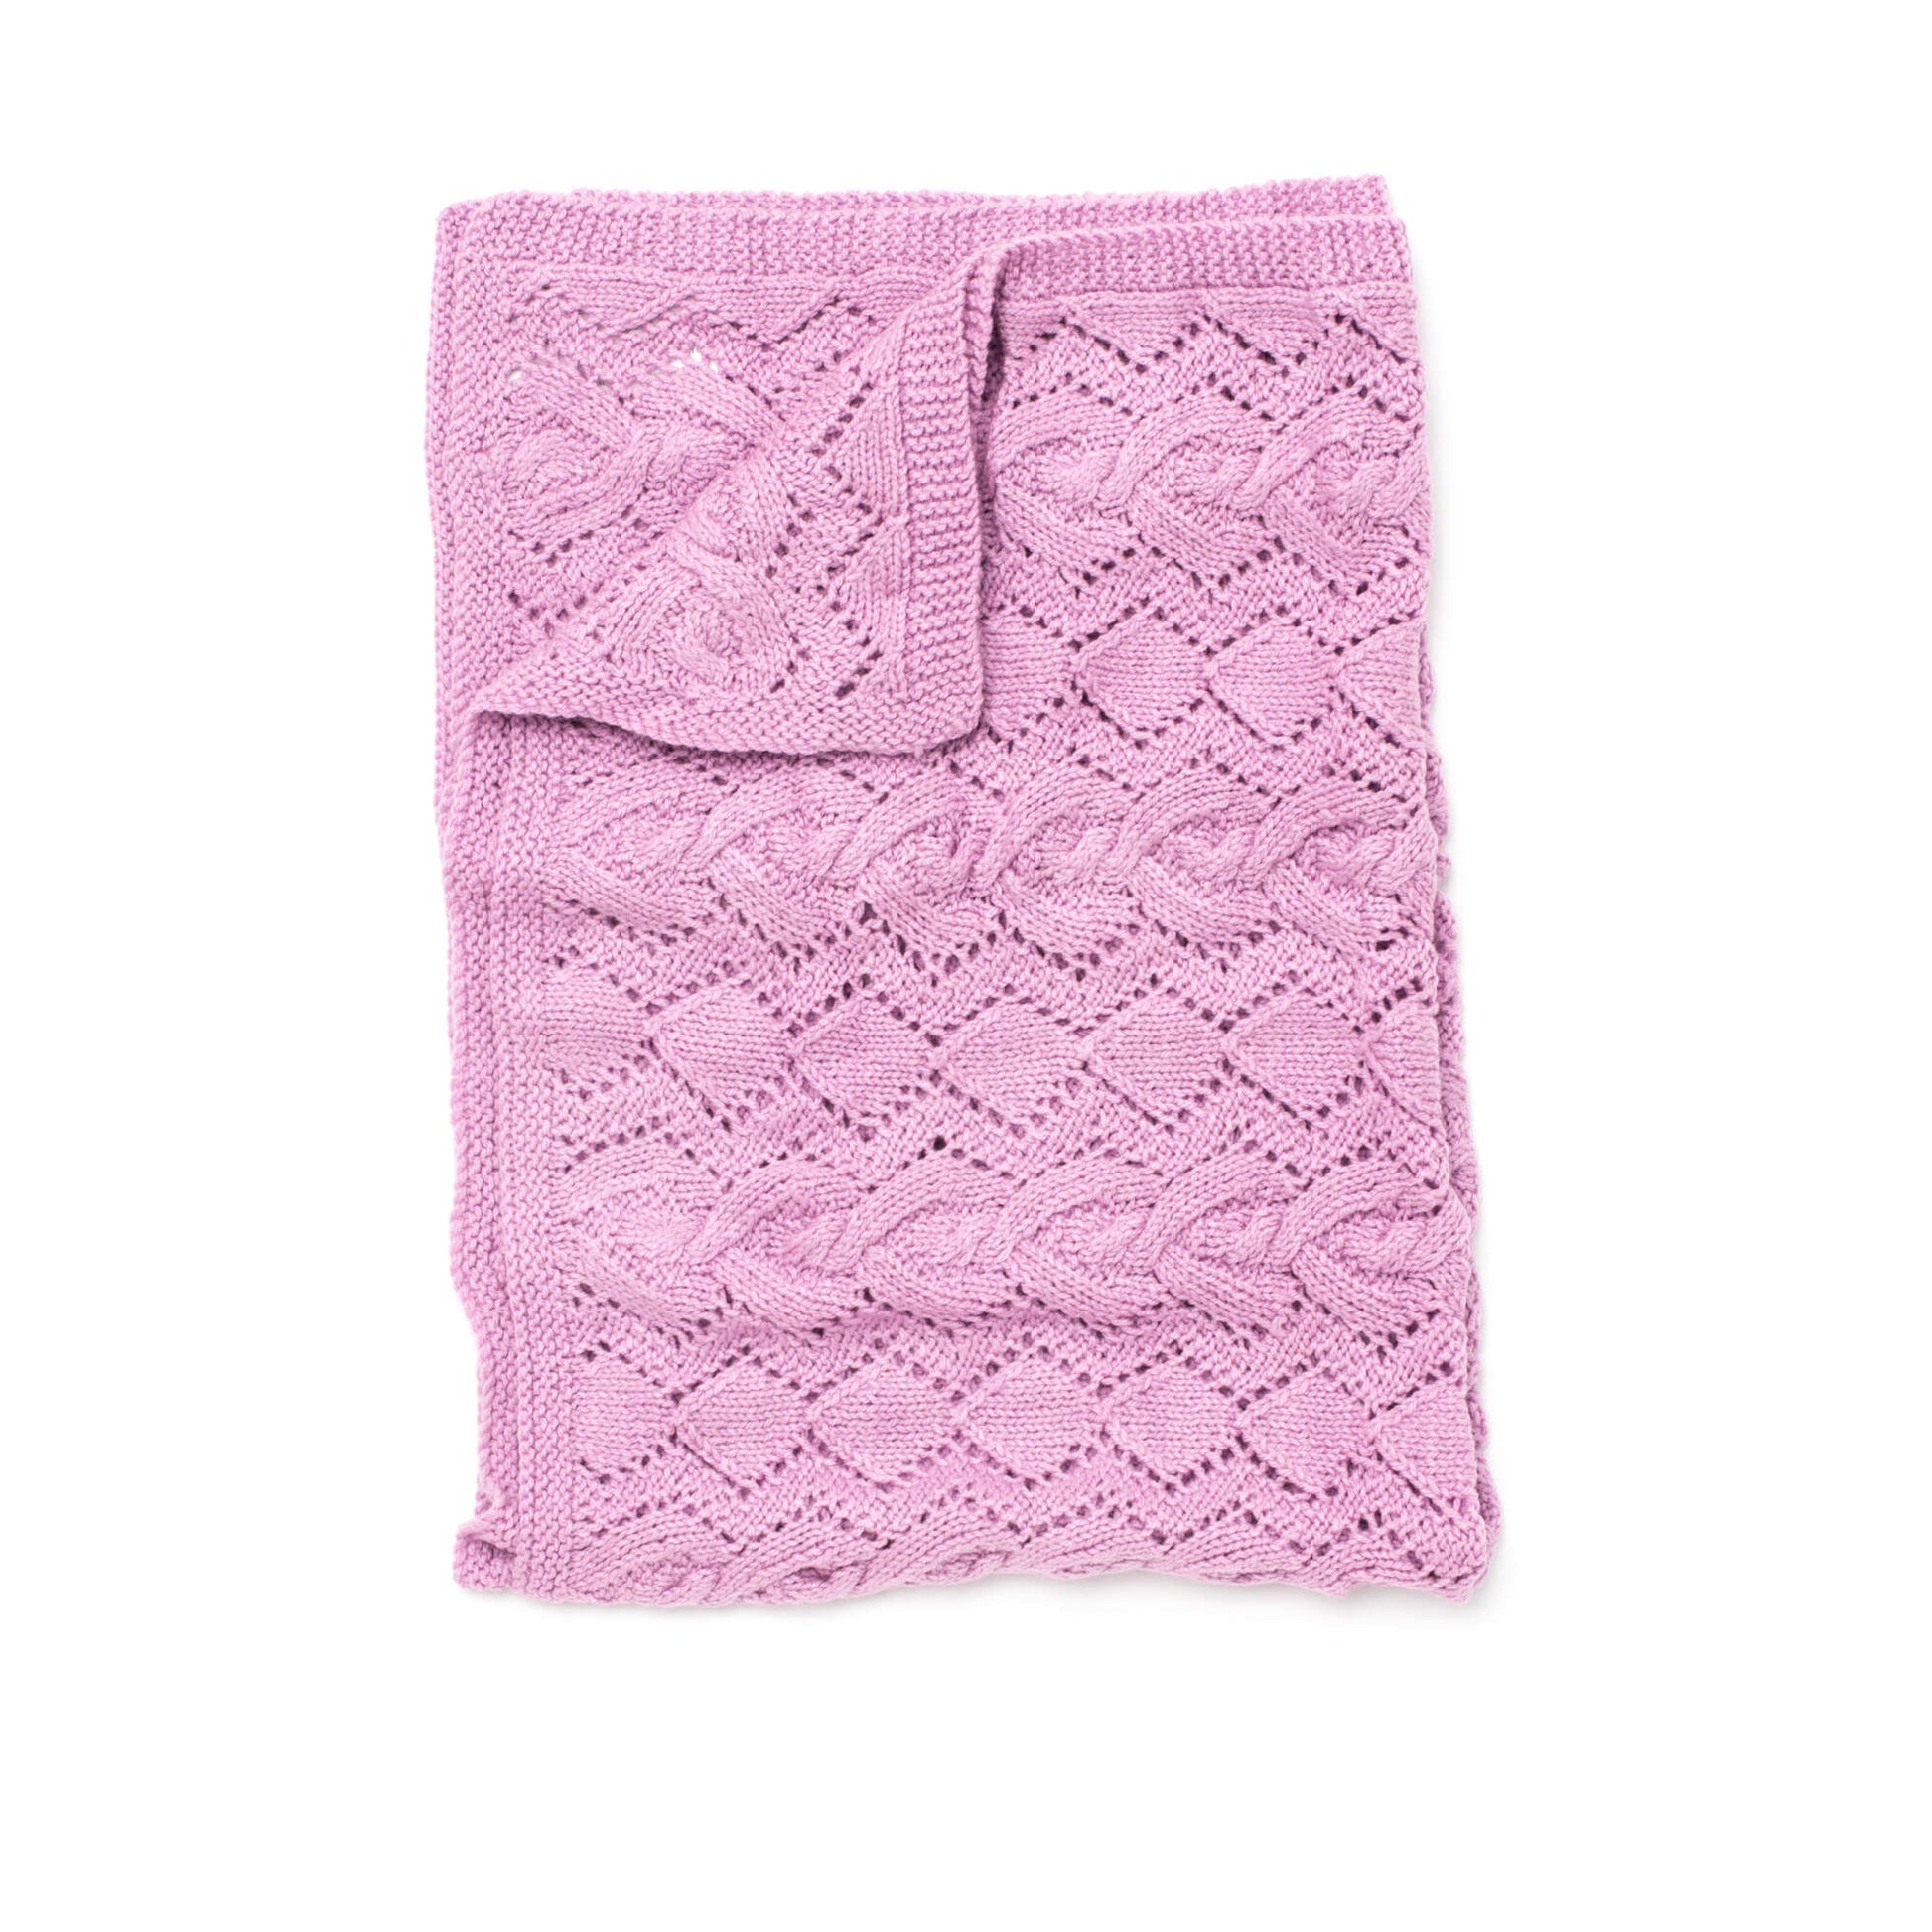 Free Bernat Cable And Lace Knit Blanket Pattern